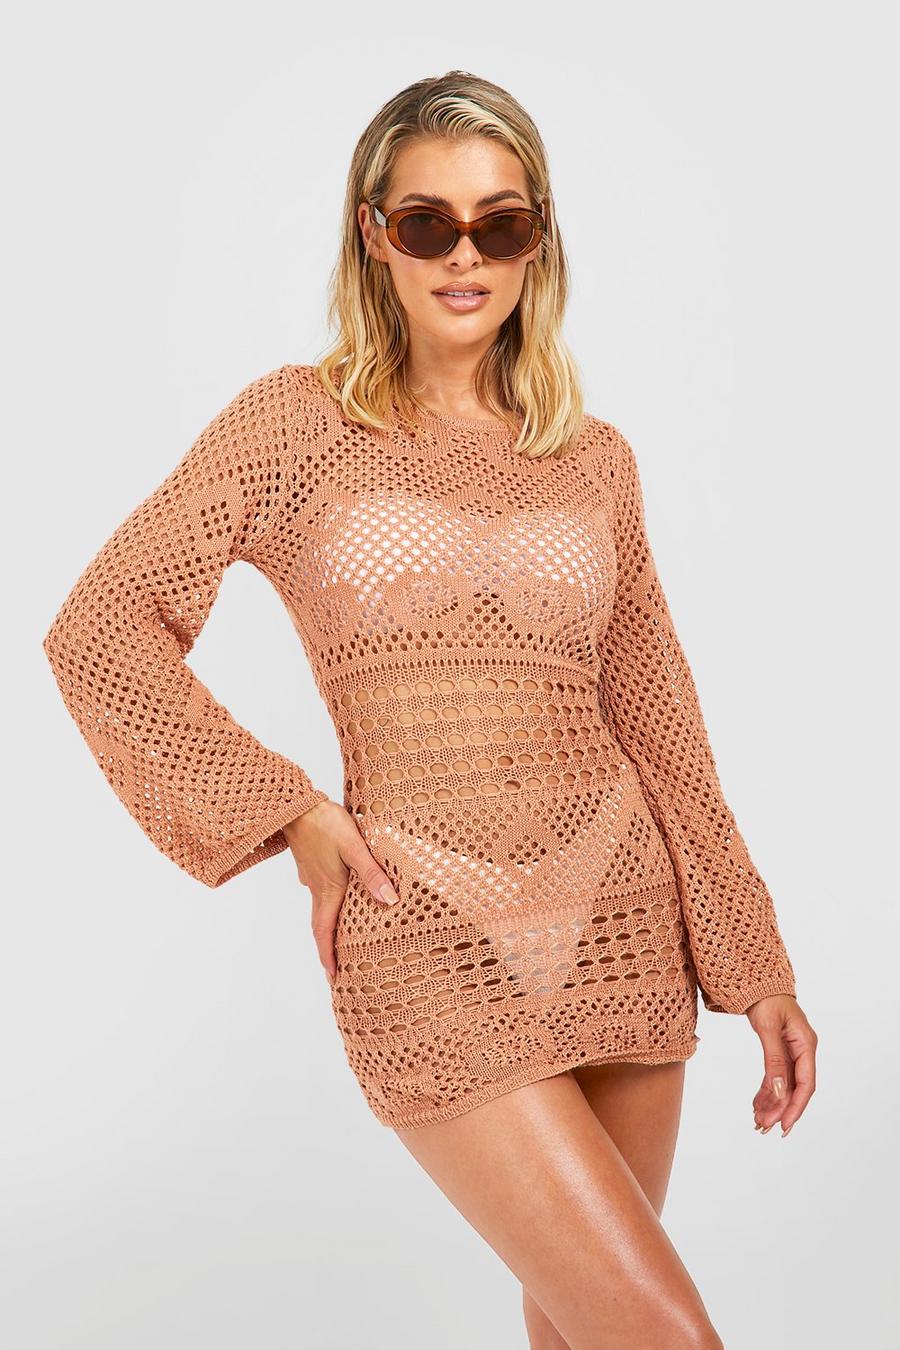 Nude Crochet Cover Up Beach Dress image number 1